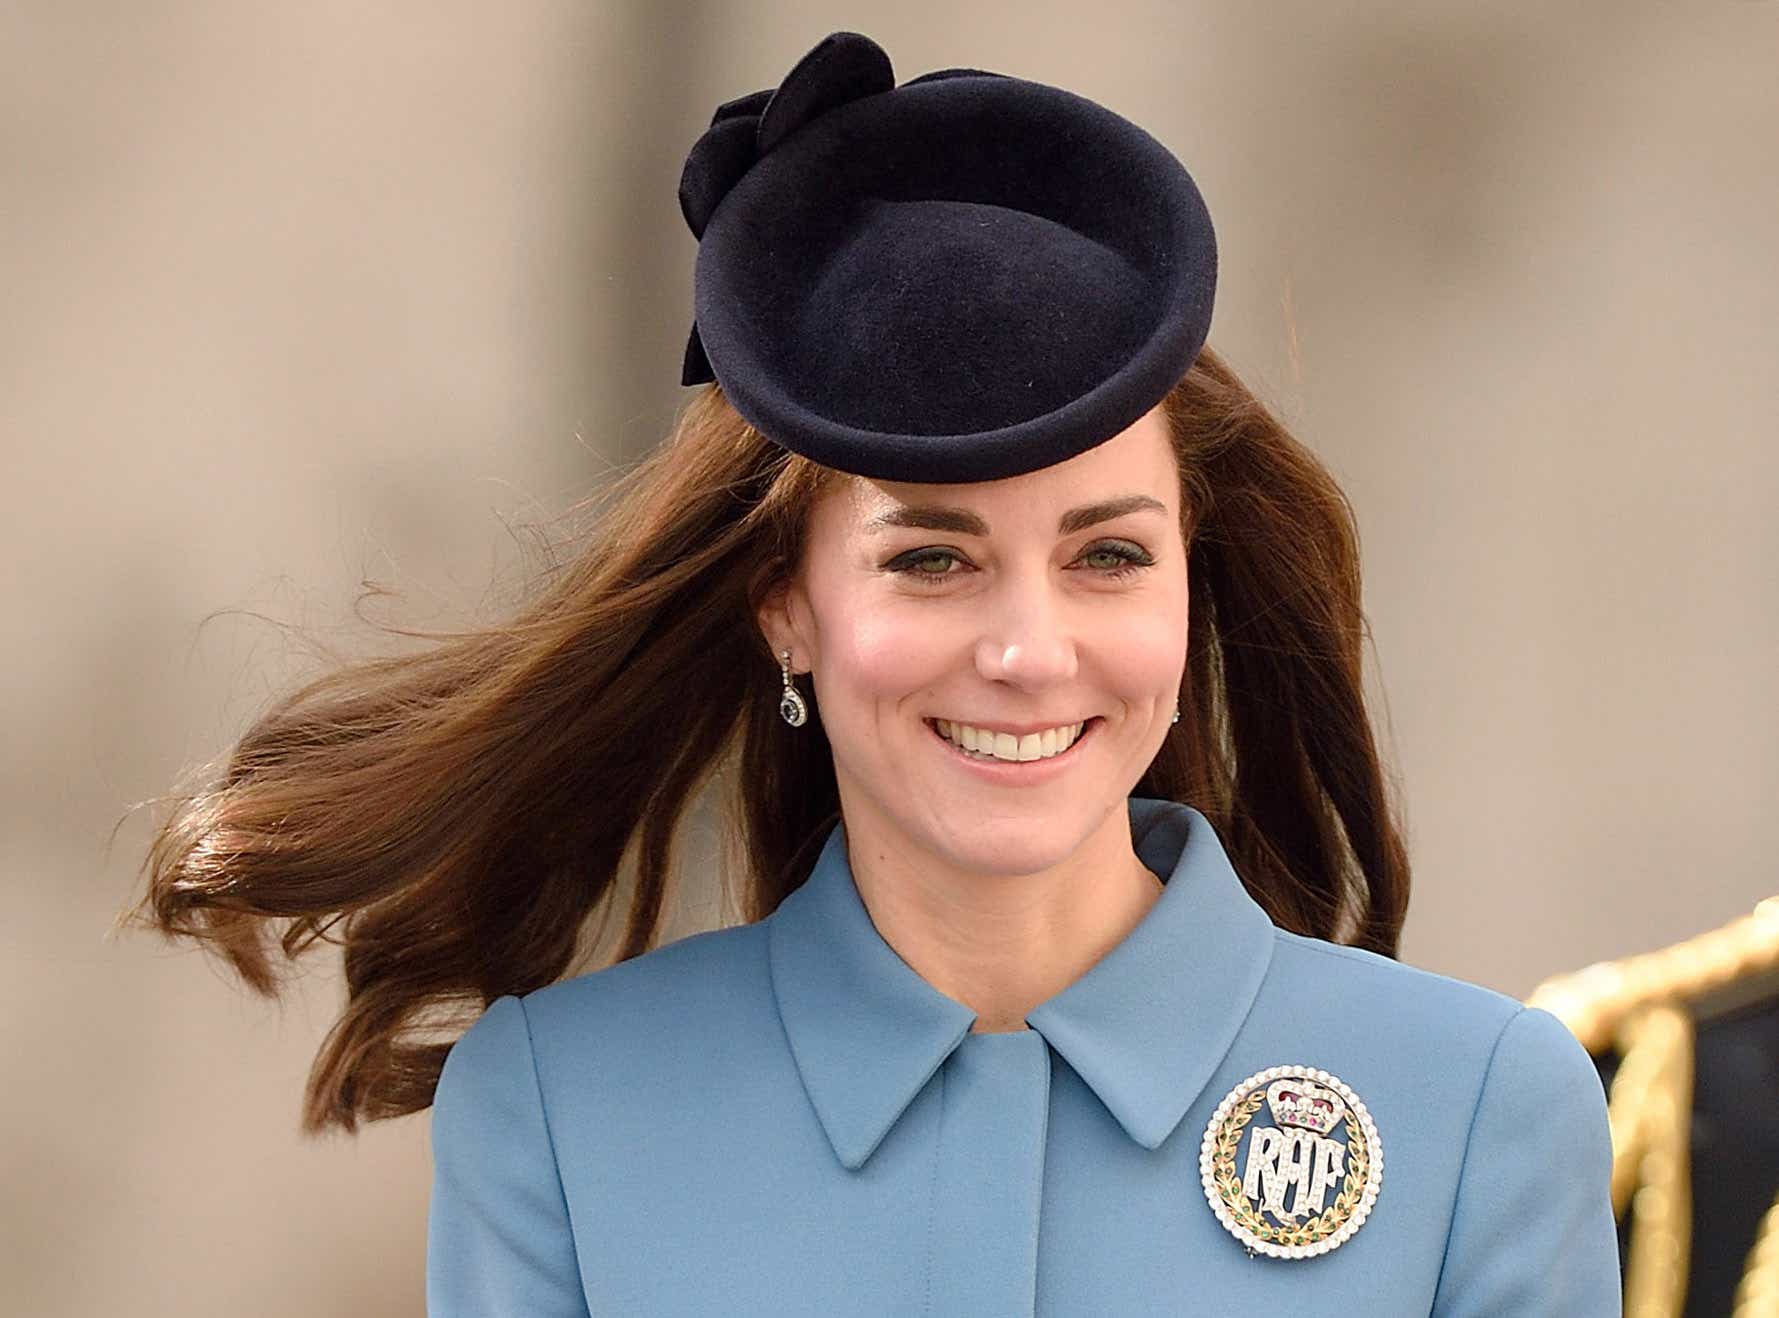 LONDON, ENGLAND - FEBRUARY 07: Catherine, Duchess of Cambridge attends the 75th anniversary of the RAF Air Cadets at St Clement Danes Church on February 7, 2016 in London, England. (Photo by Karwai Tang/WireImage)